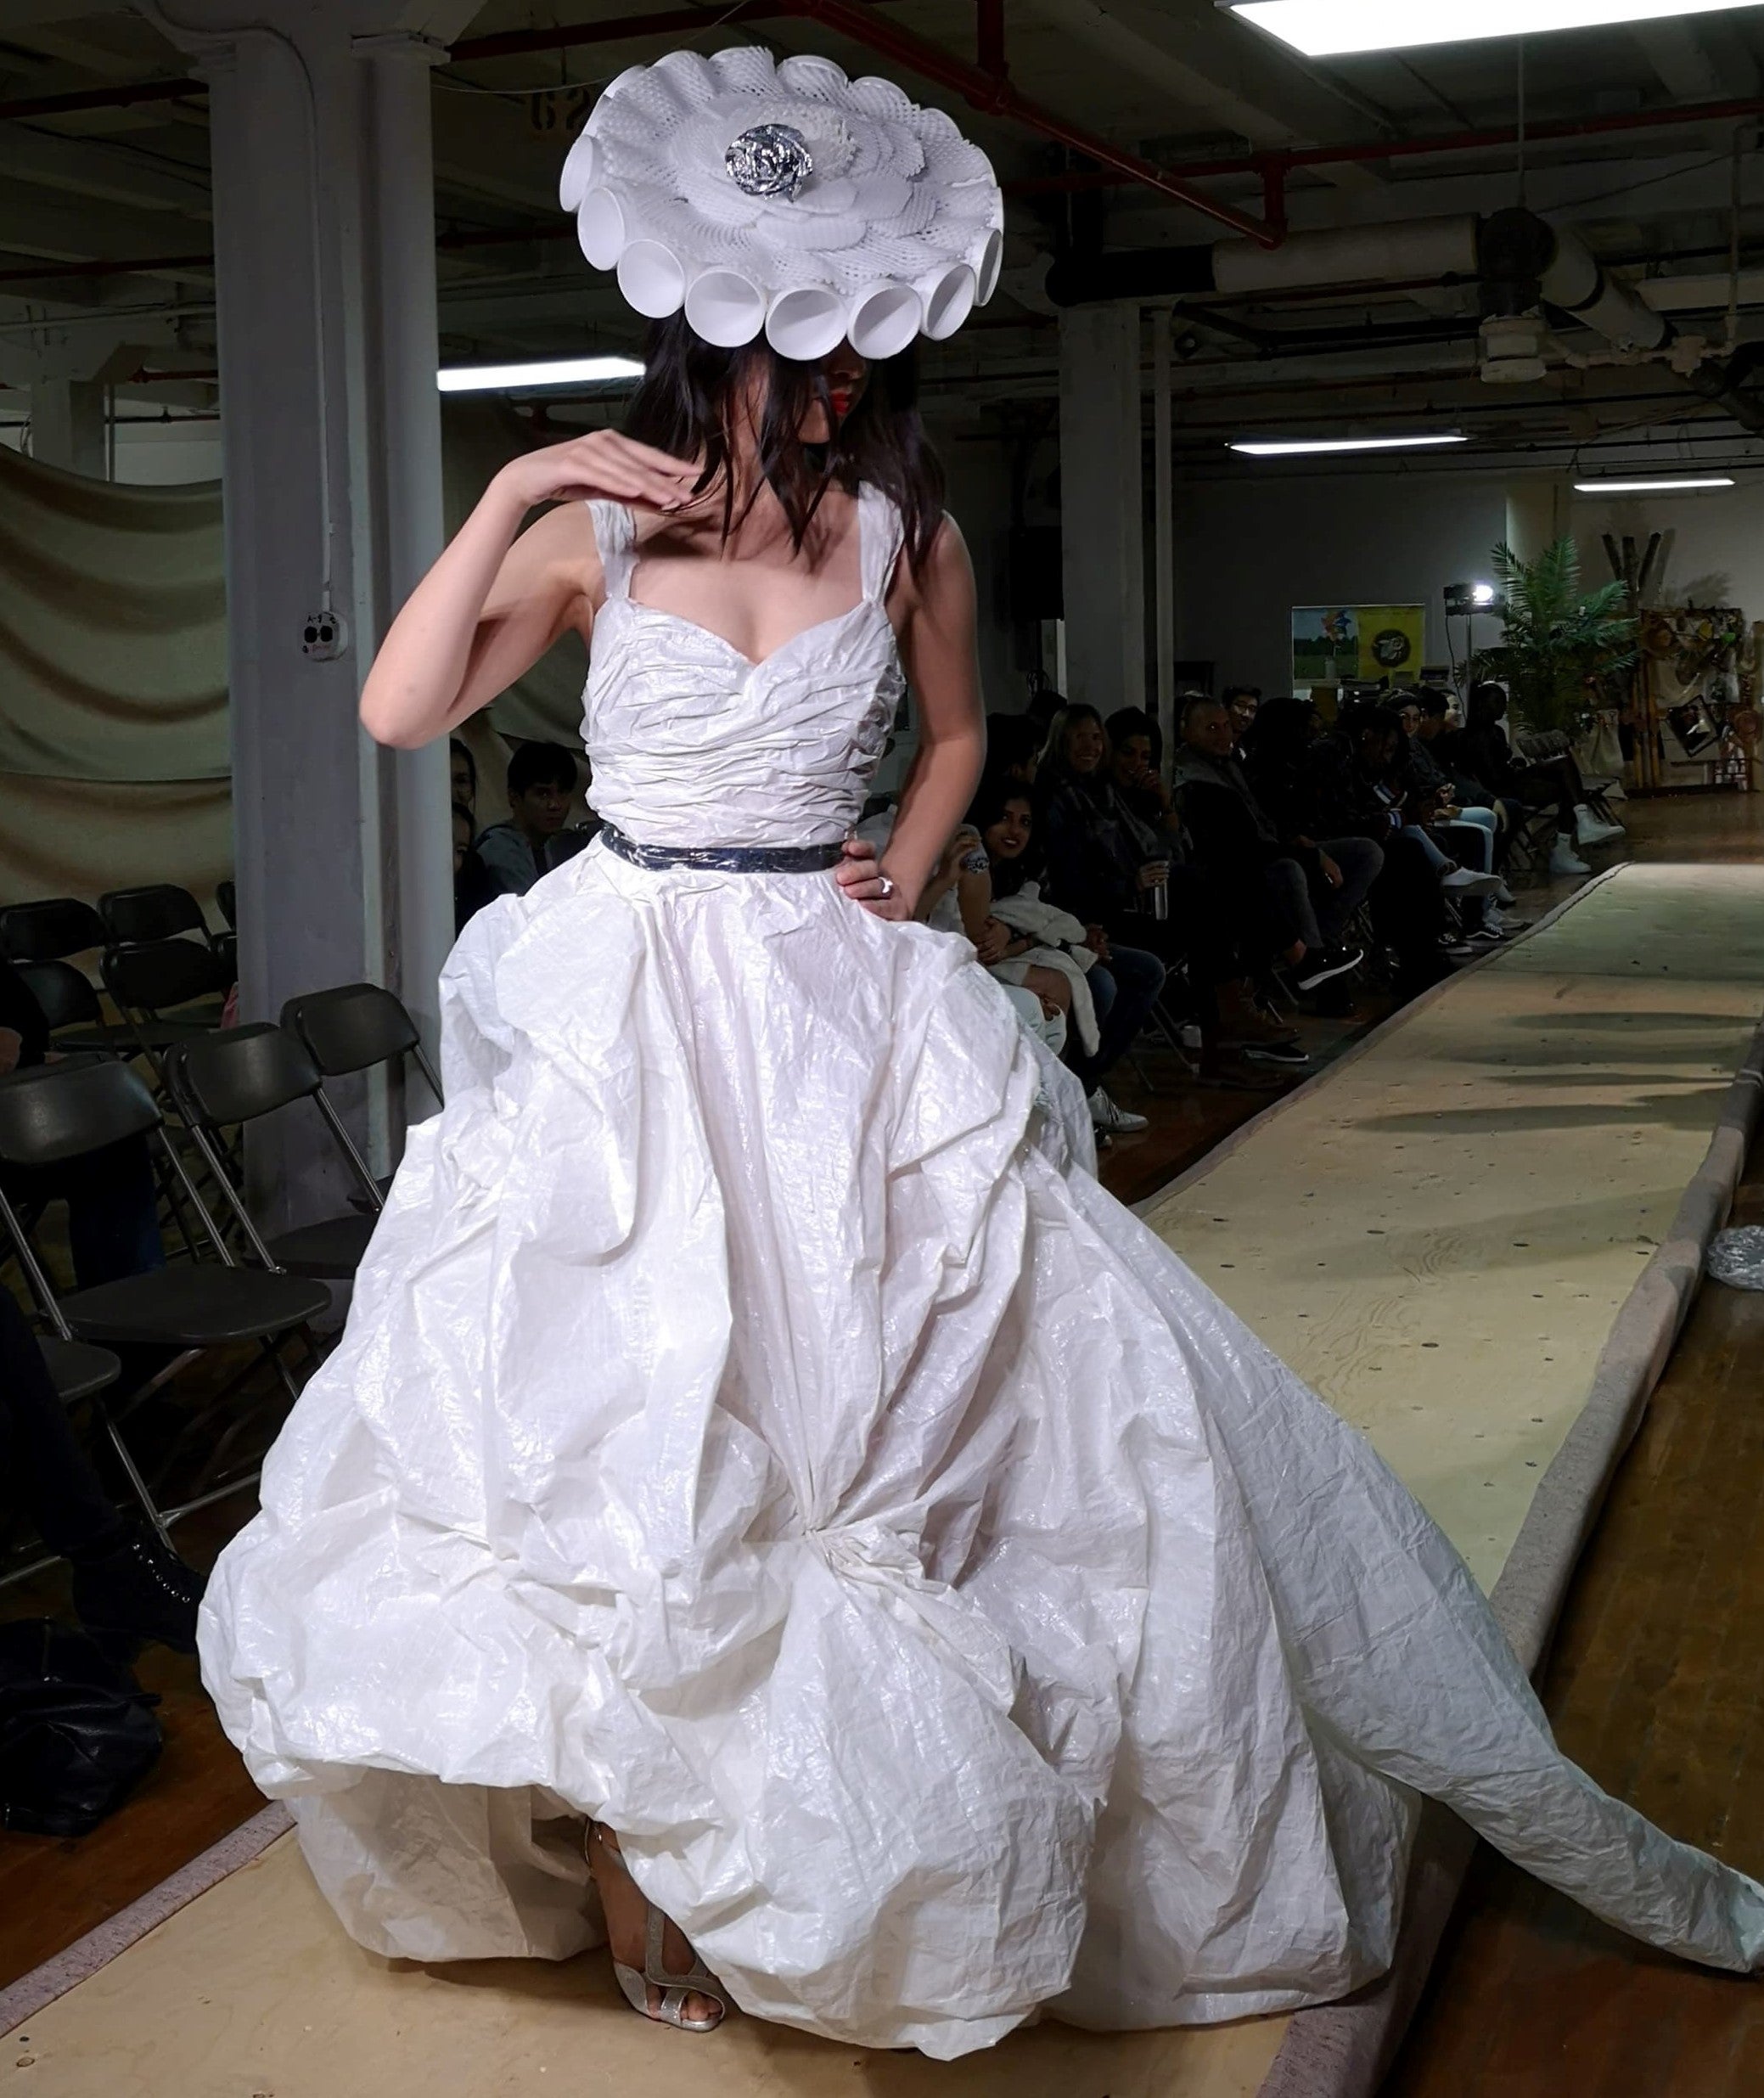 Student modelling a white dress made from sustainable material for the “Waste” segment.